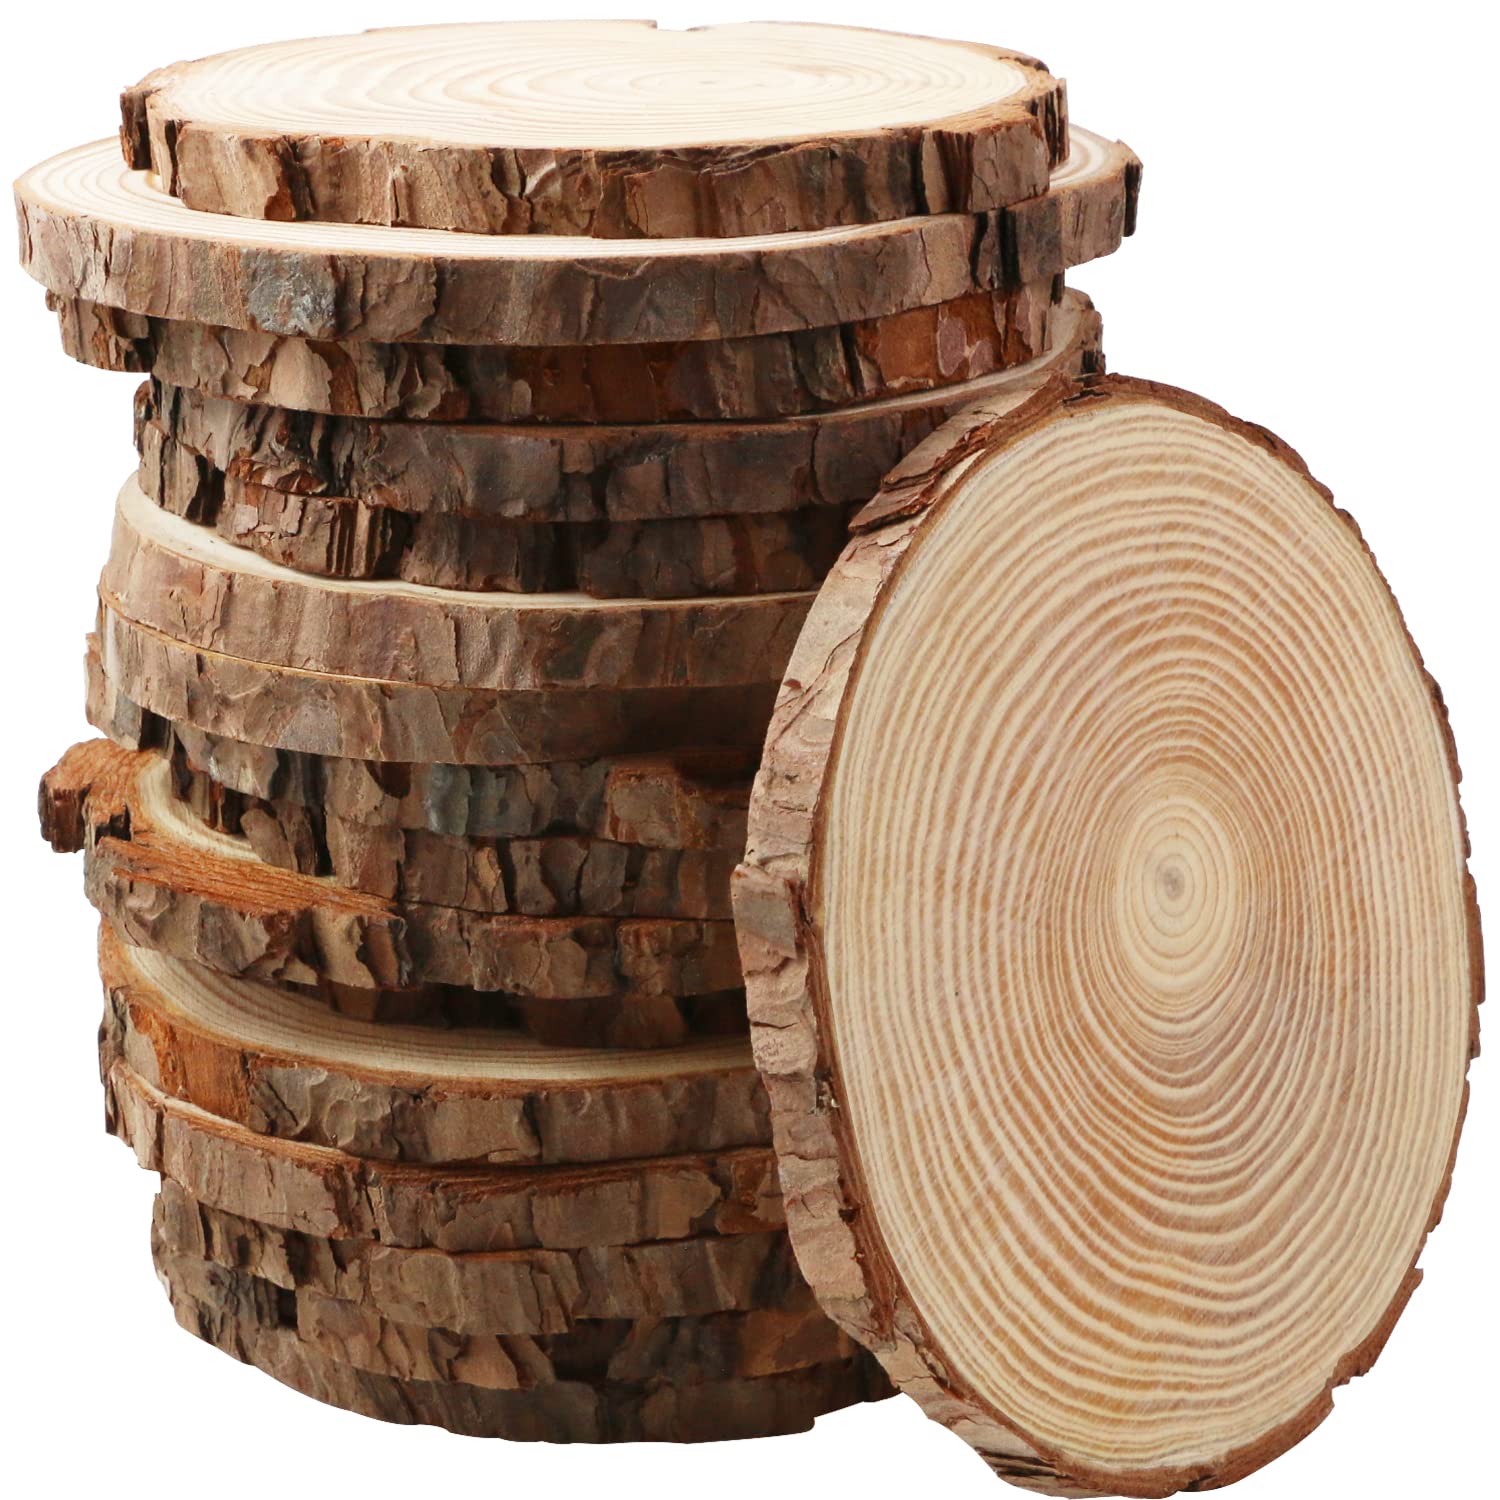 FSWCCK 17 PCS Unfinished Wood Slices 5.1-5.5 Inch Craft Wood kit Round Wood  Discs with Tree Bark Circles Crafts Christmas Ornaments Wood Slices  Centerpieces for Rustic Wedding Decoration